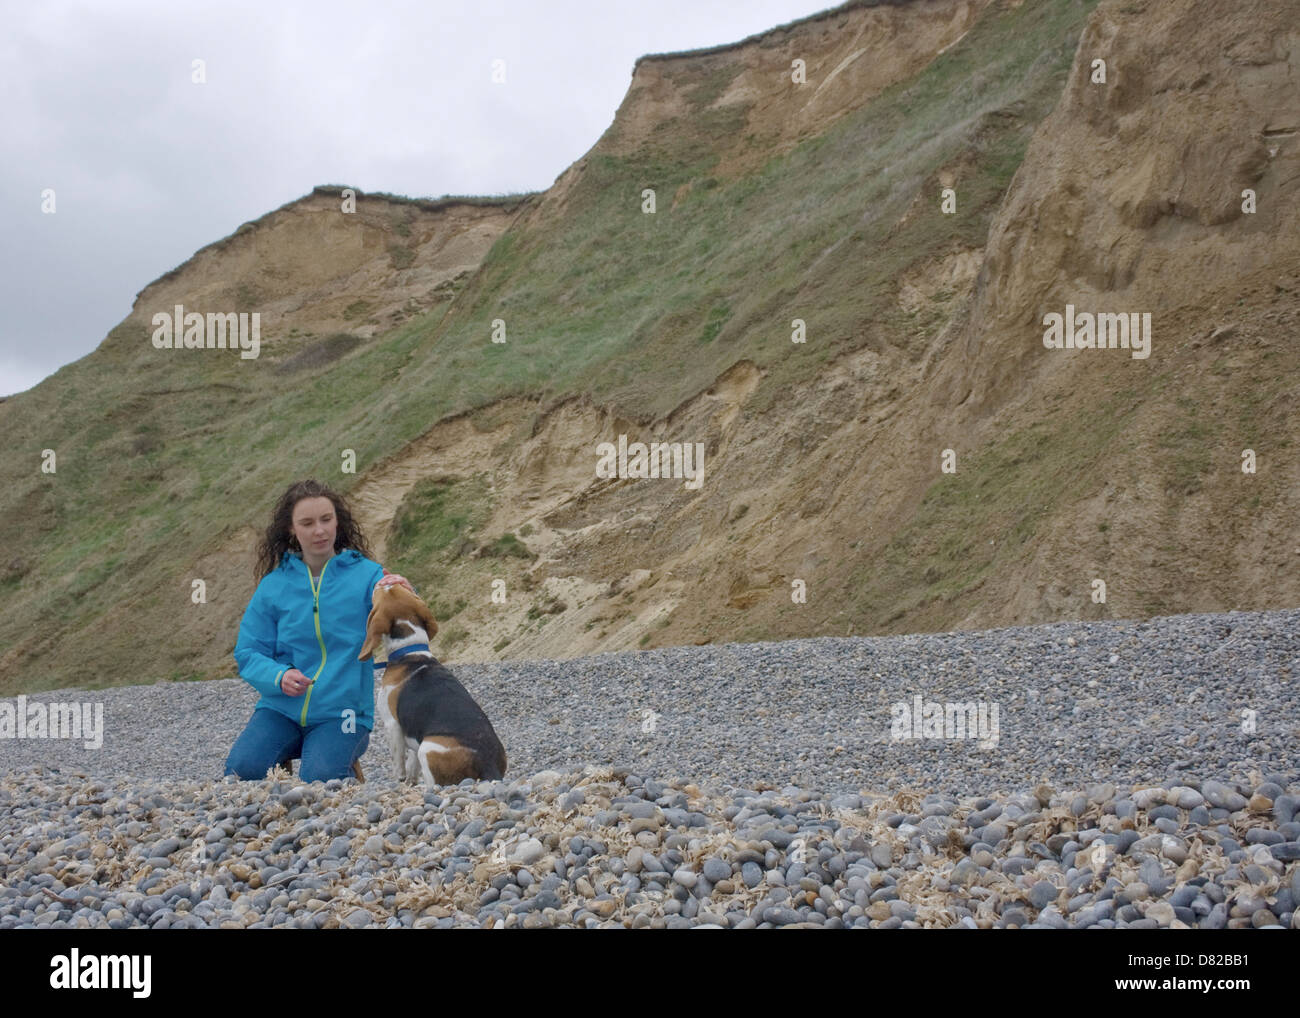 Woman kneeling on beach with cliffs in background fussing her dog. Stock Photo